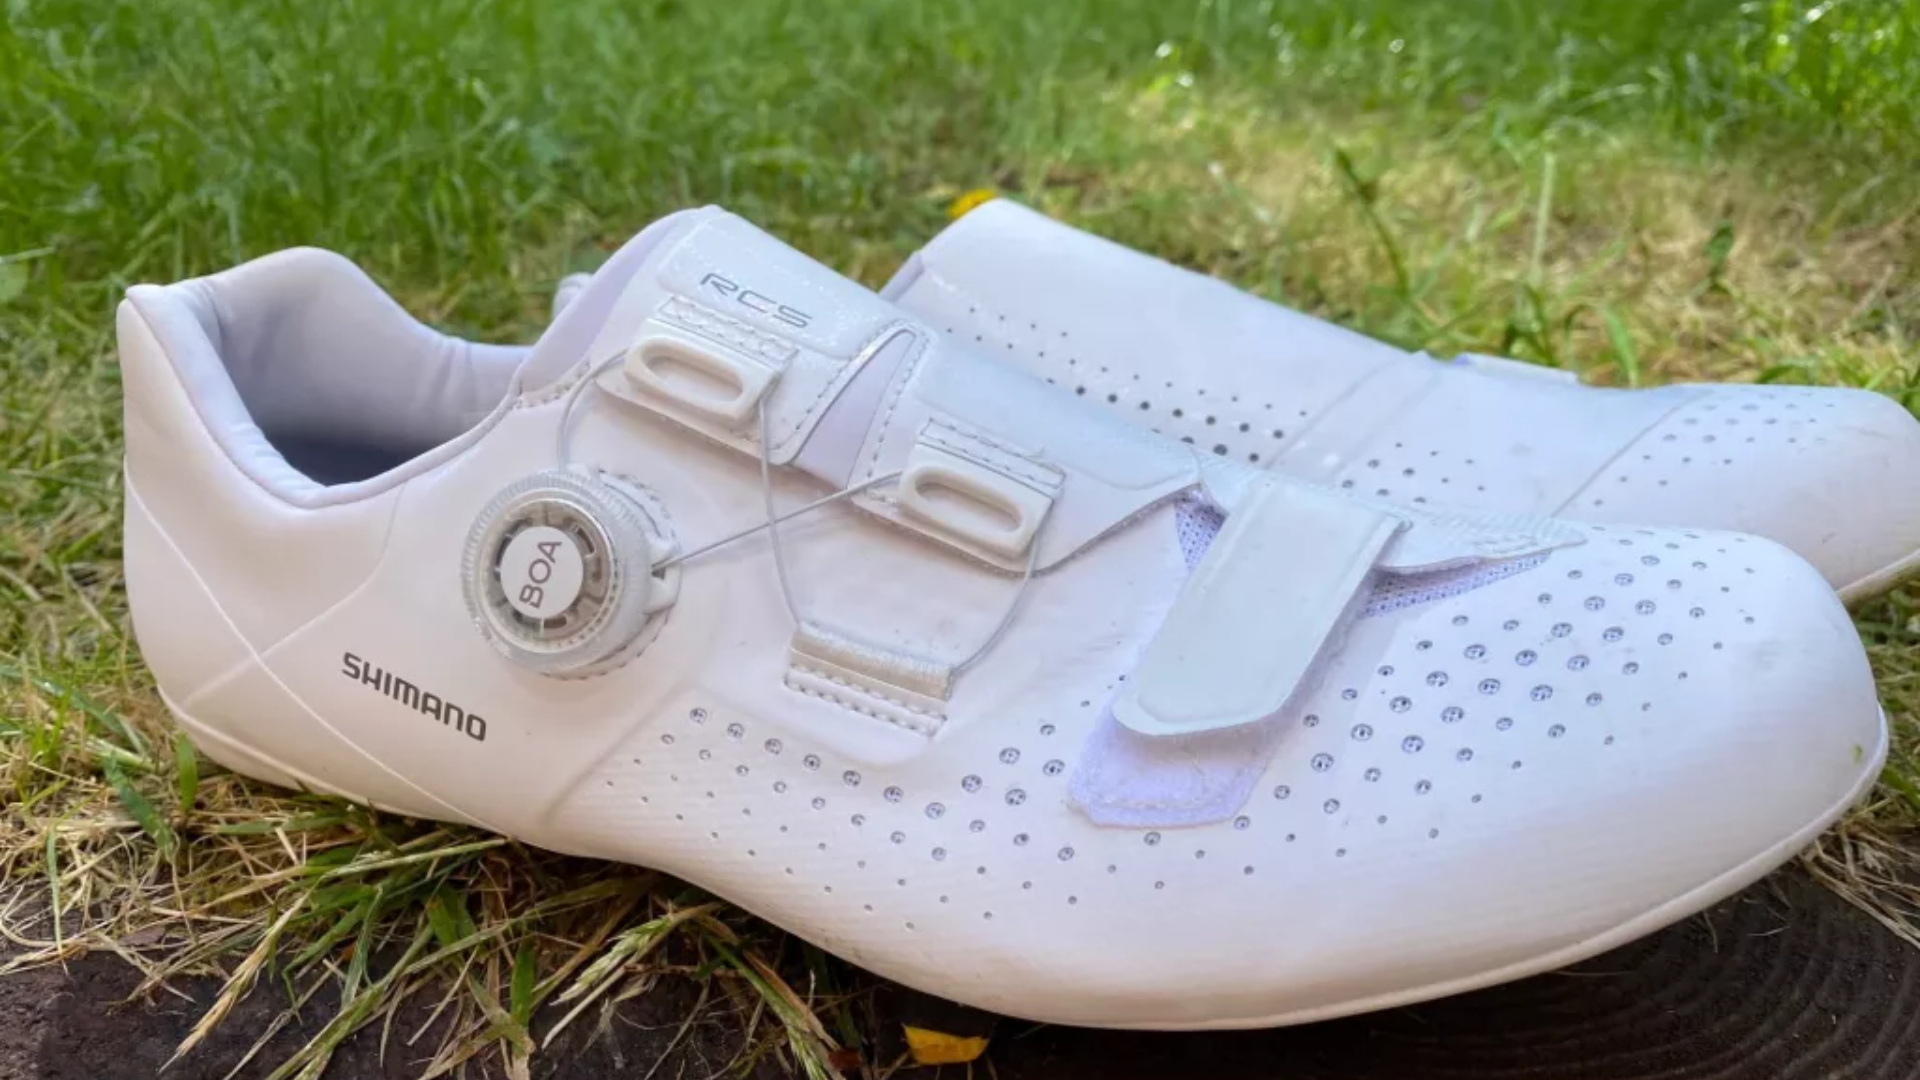 Shimano RC5 cycling shoes review